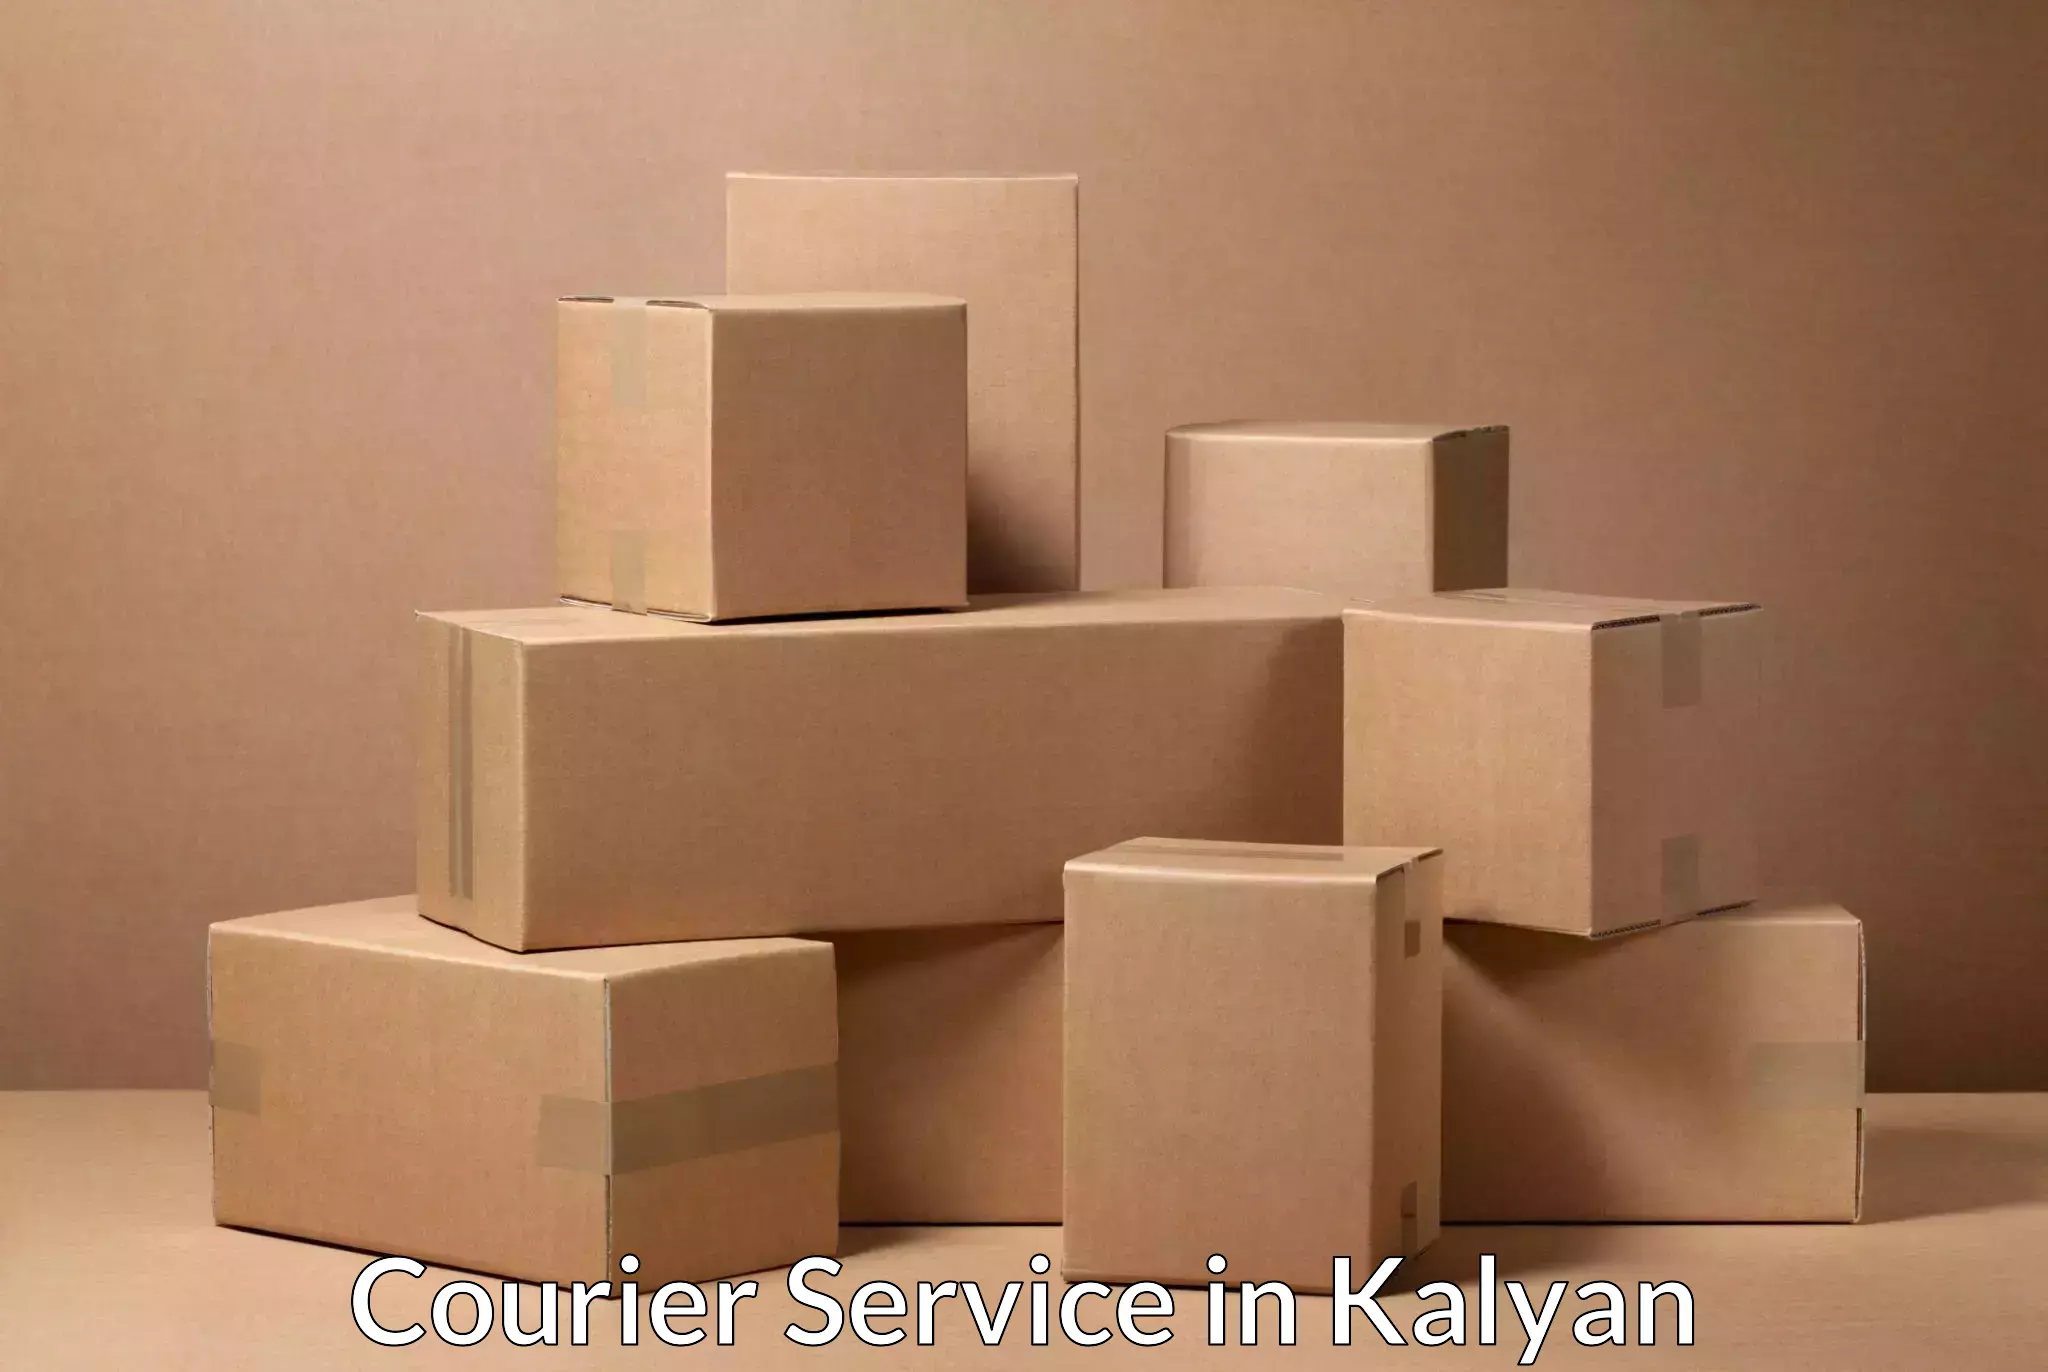 Tailored delivery services in Kalyan